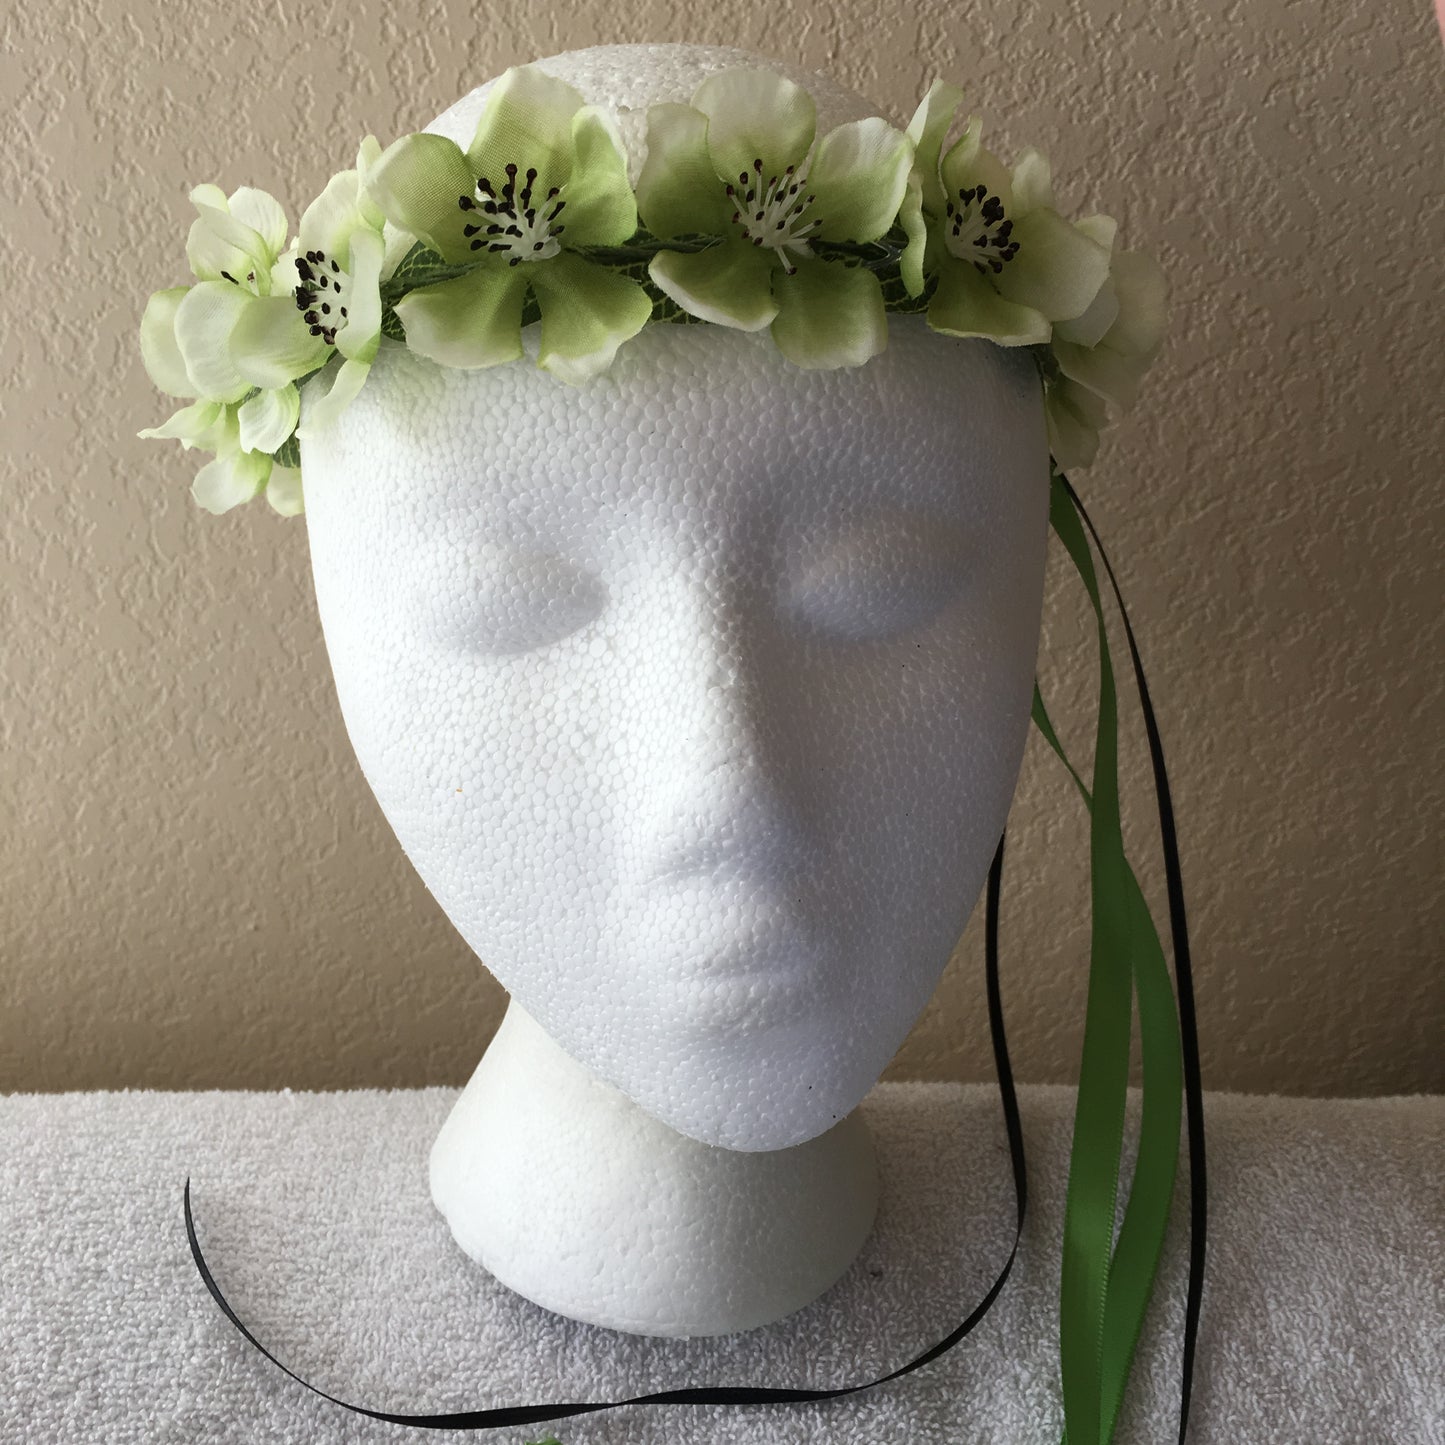 Extra Small Wreath - Green flowers w/ black spotted centers